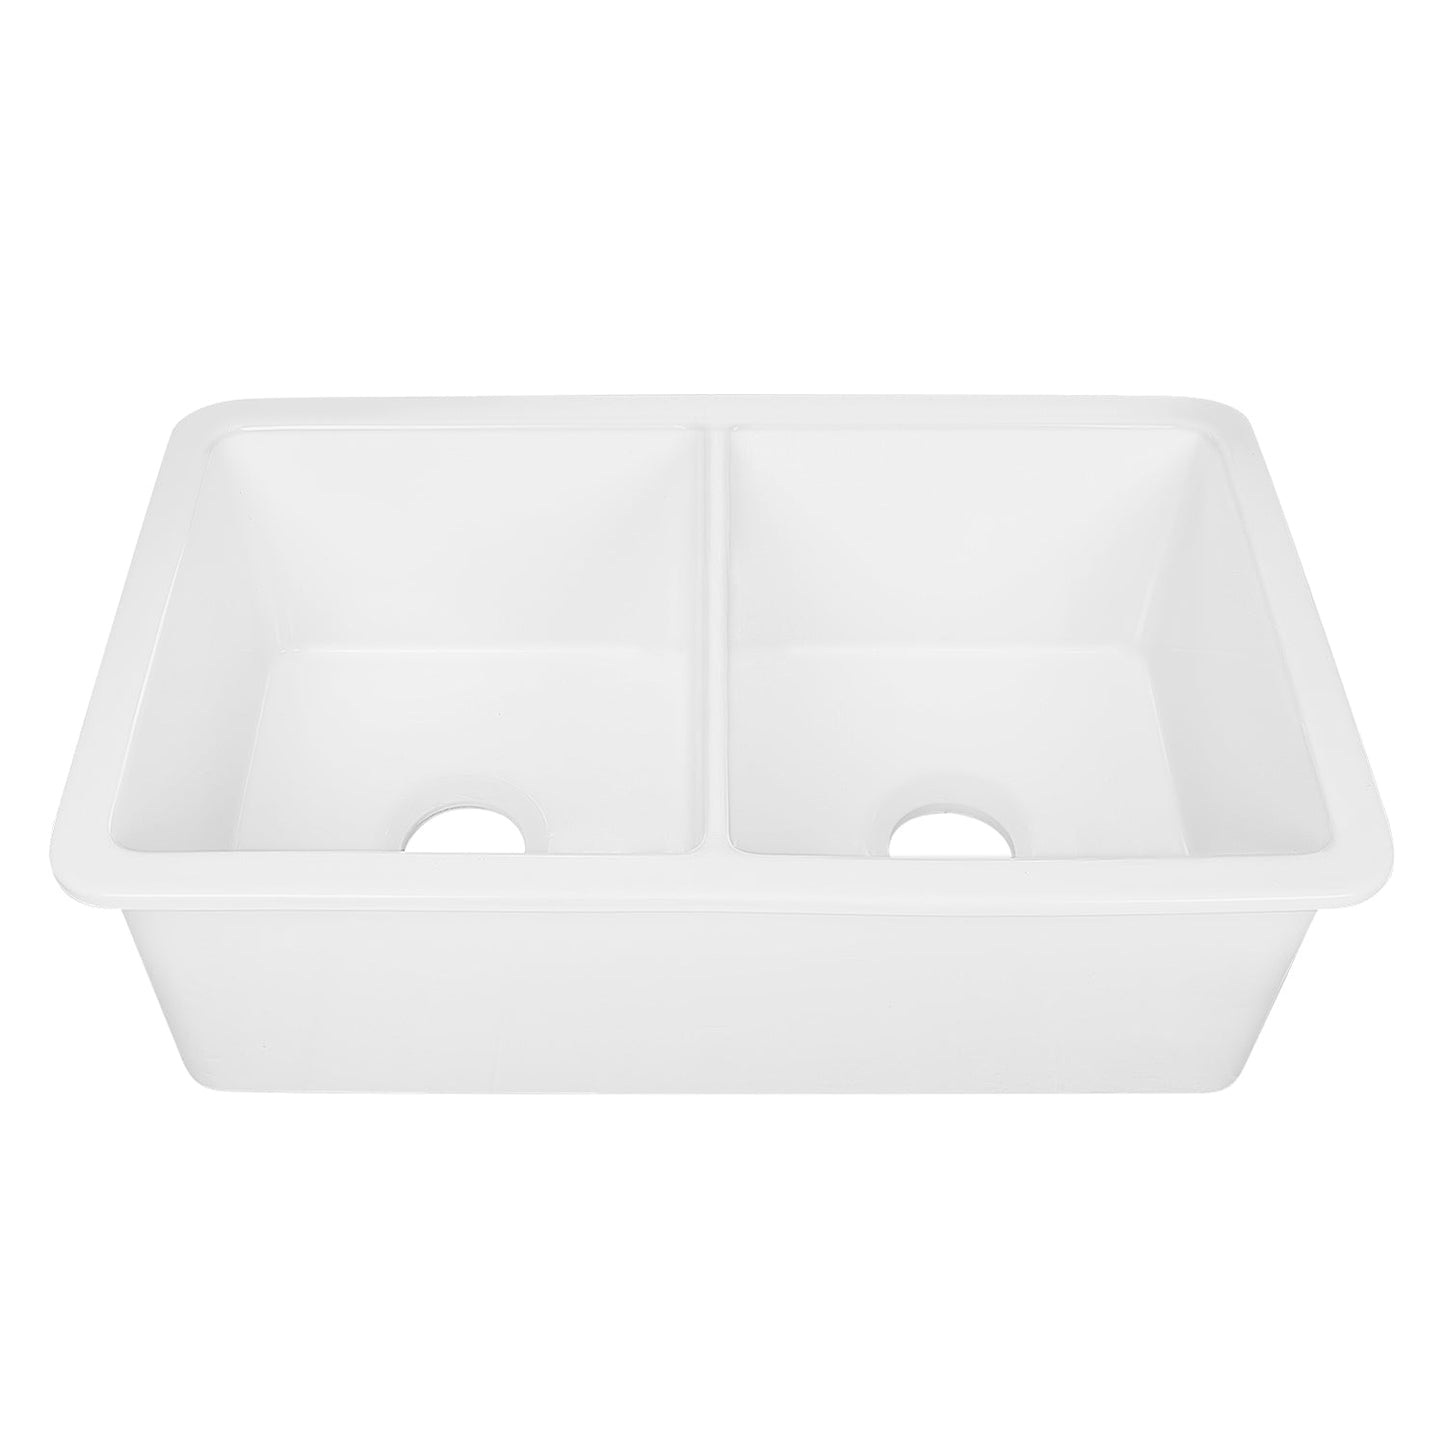 DeerValley Glen 32" L x 19" W DV-1K513 Rectangle White Fireclay Large Capacity Undermount or Topmount Farmhouse Kitchen Sink With Basket Strainer Drain and Grid